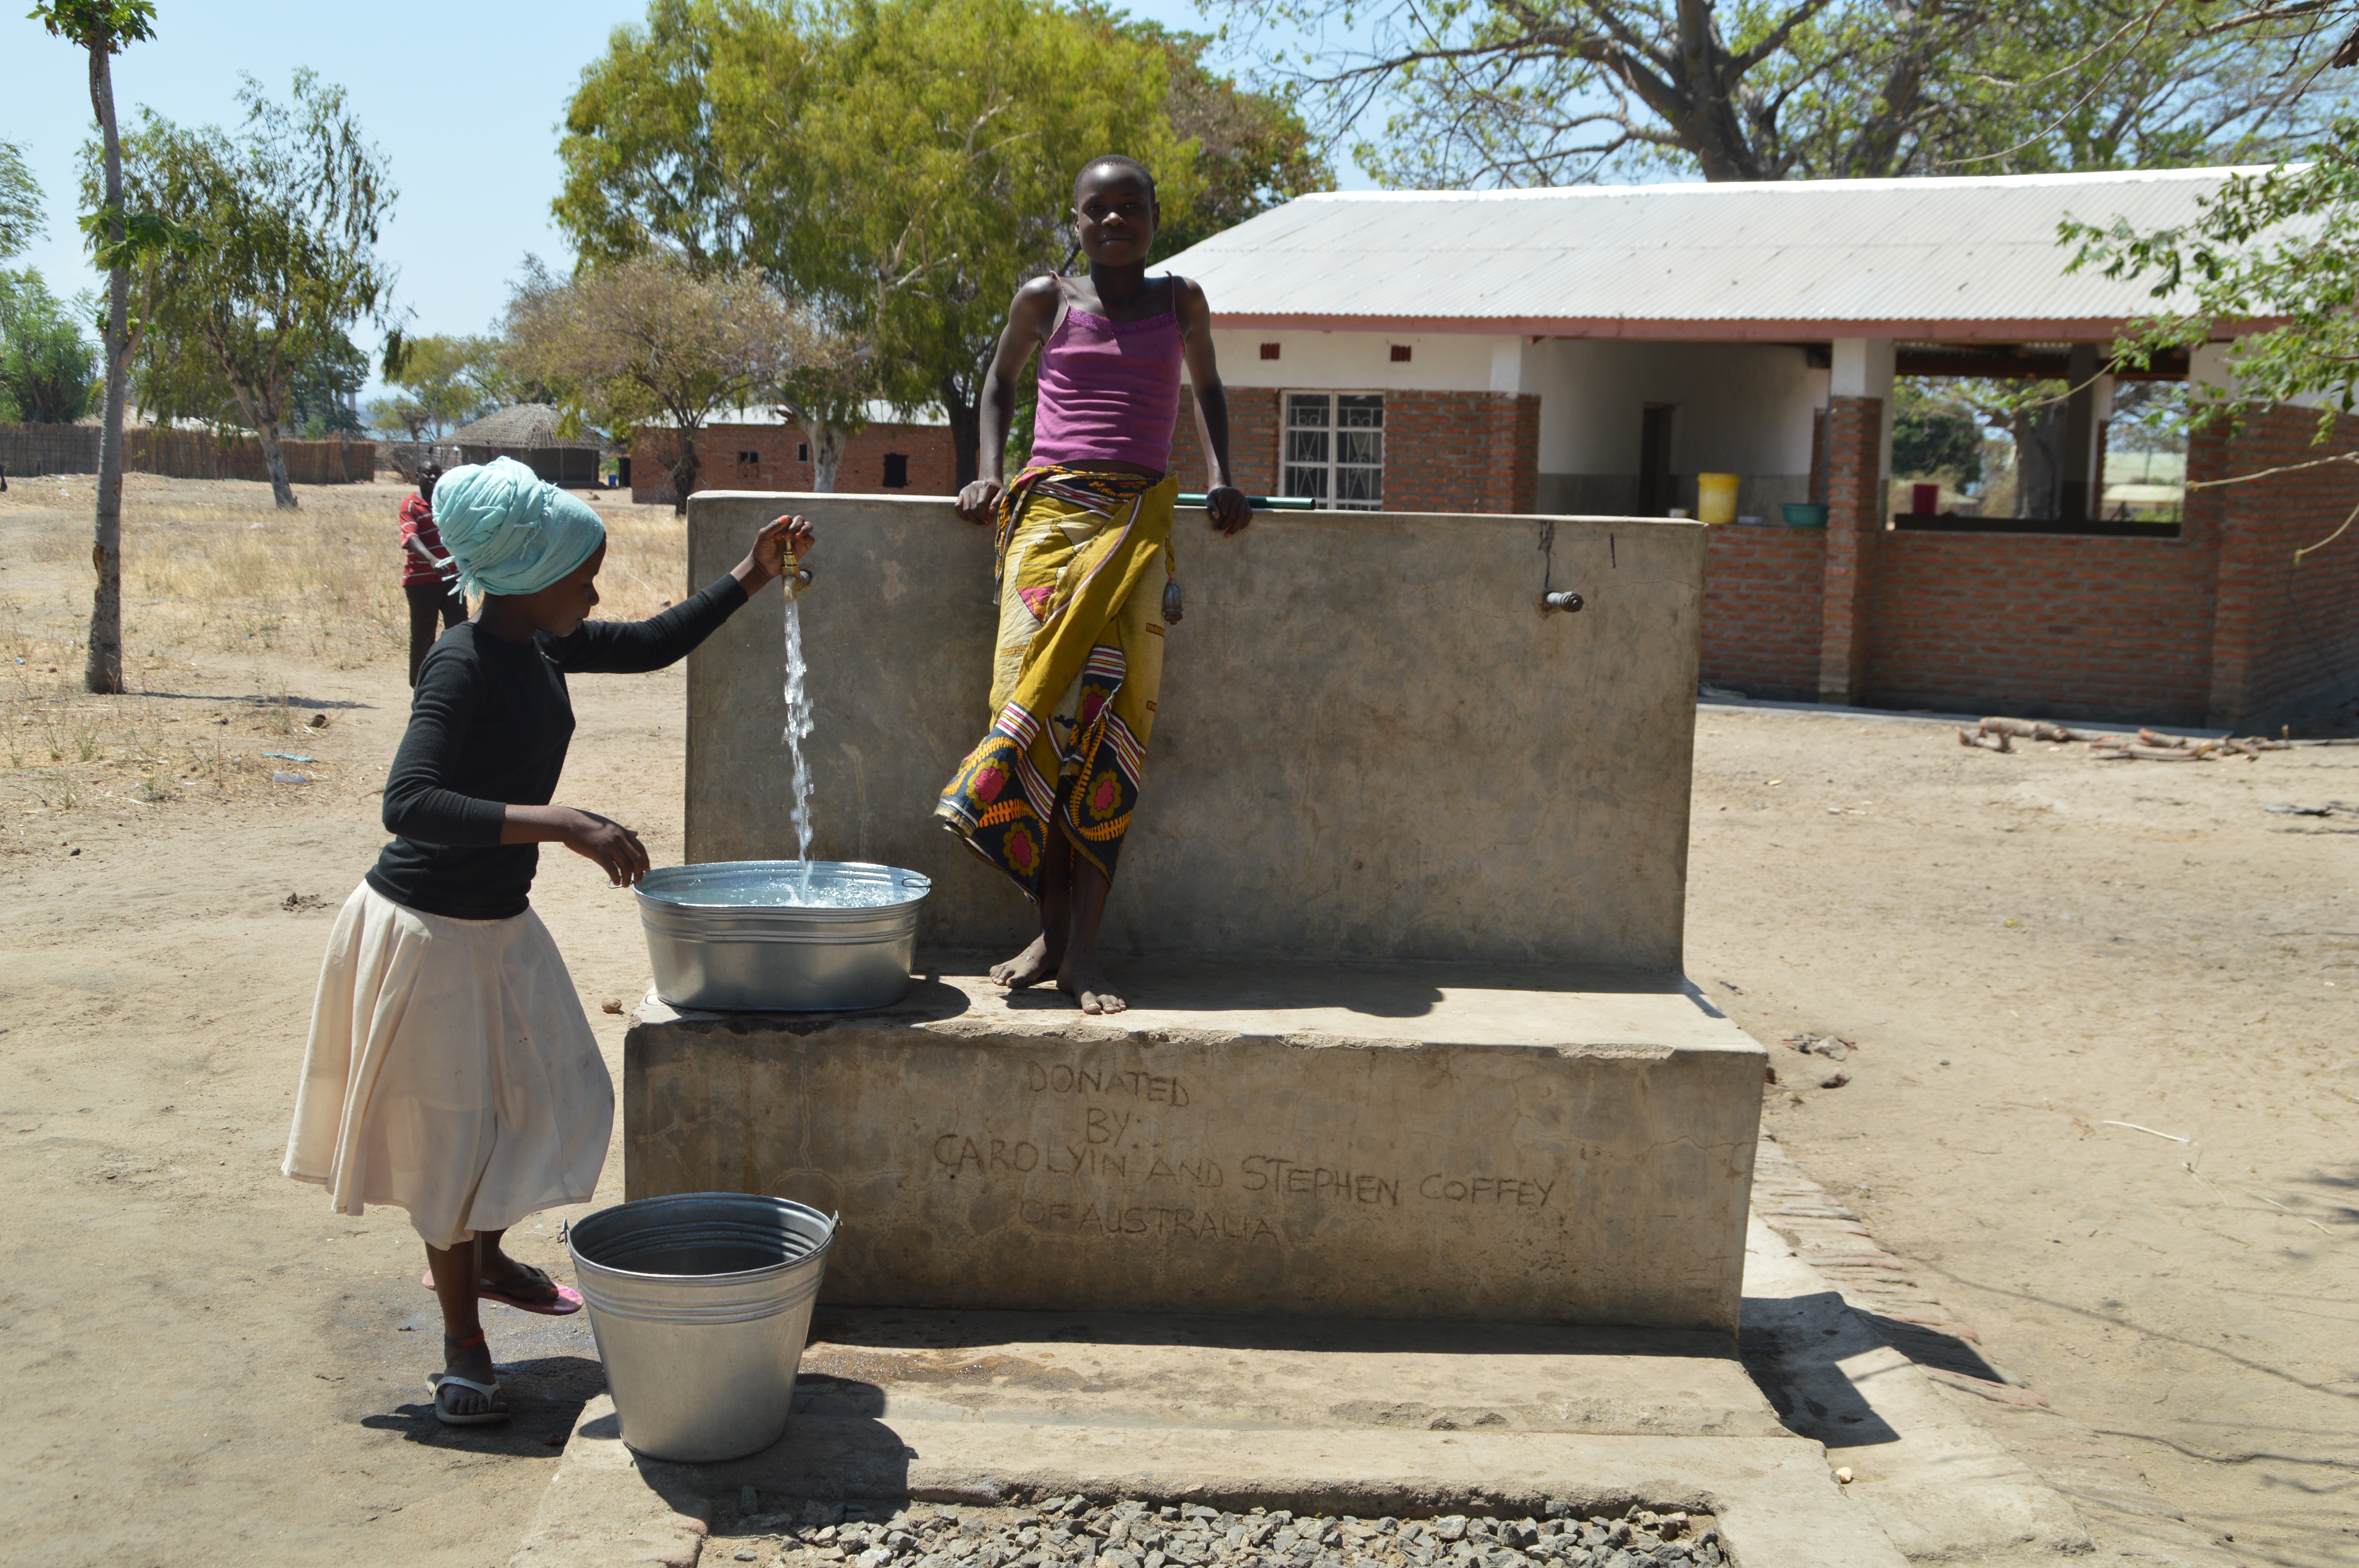 Developing sustainable communities in Malawi